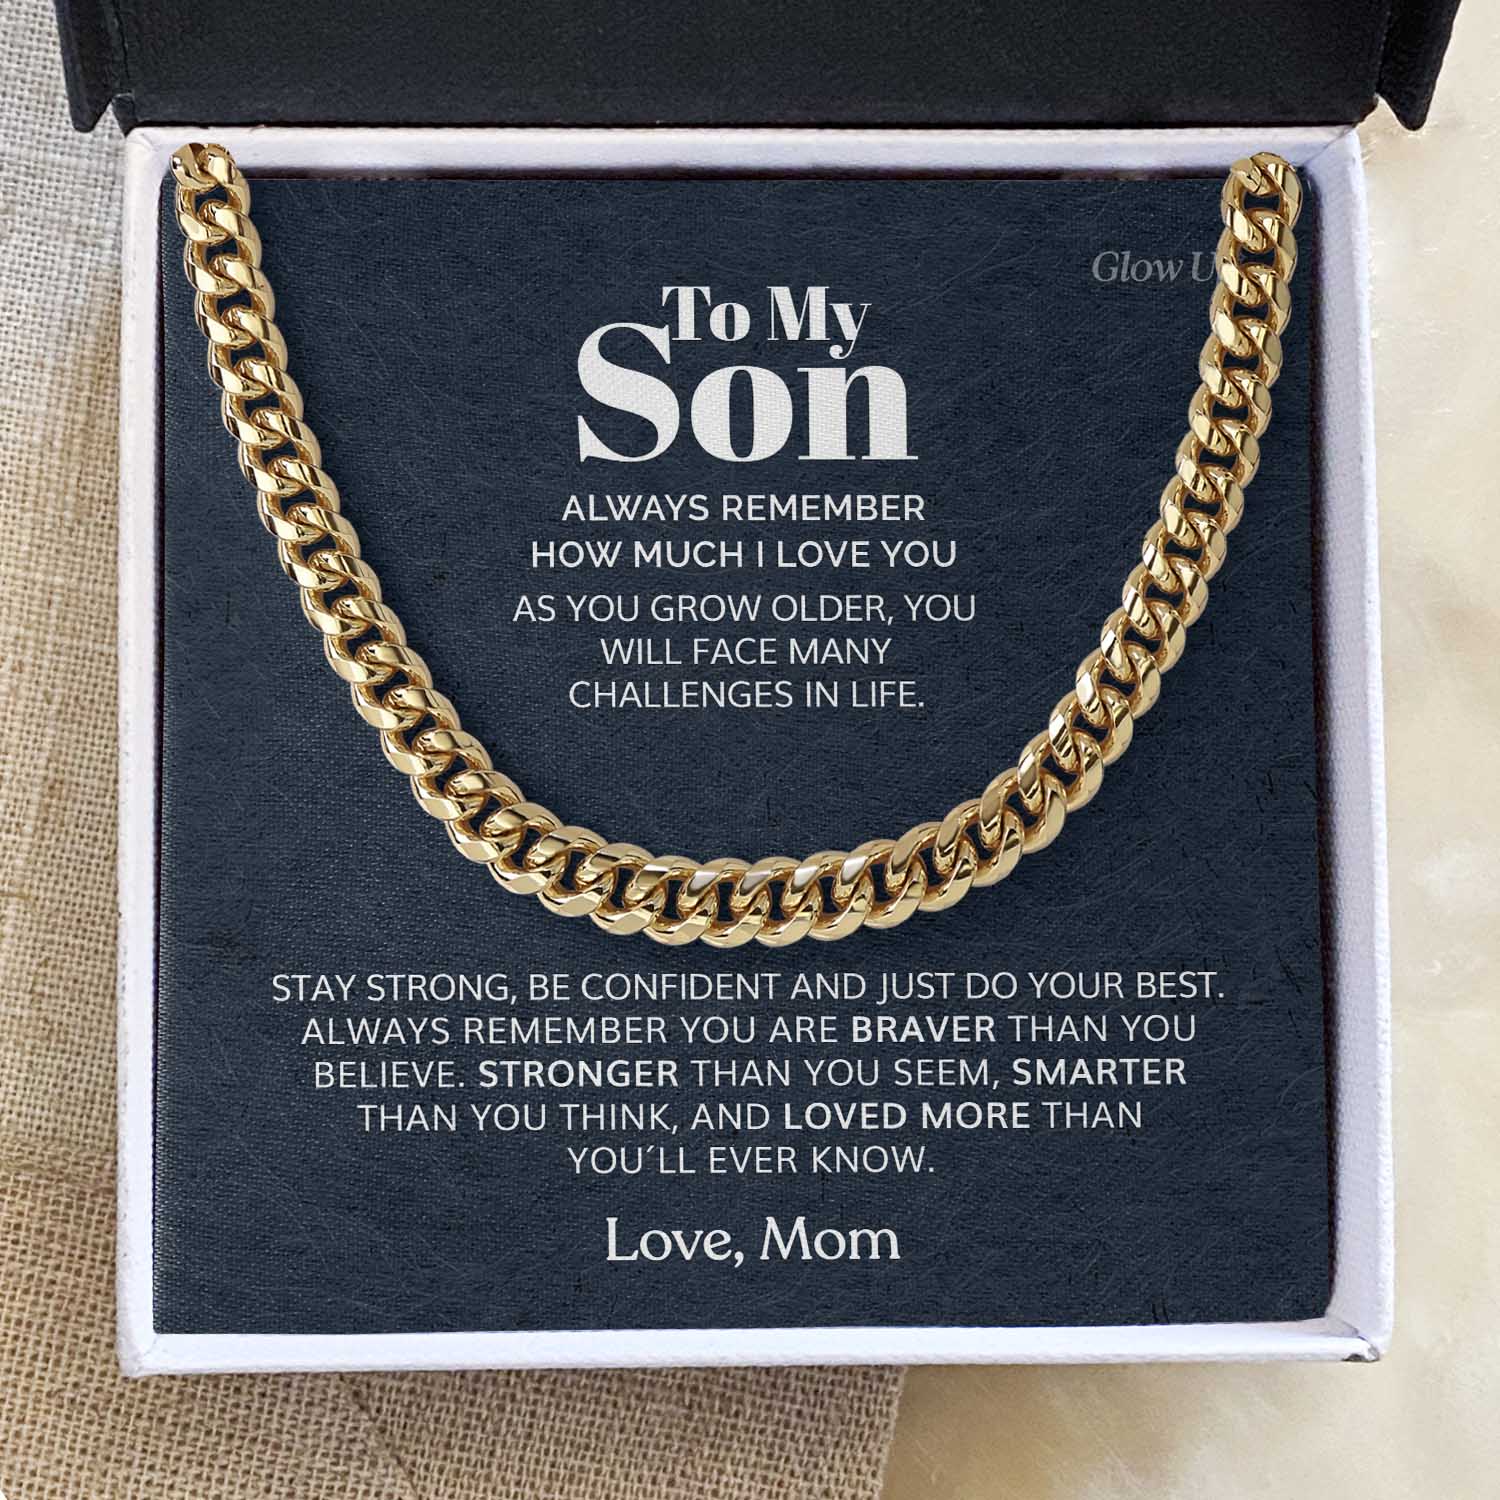 ShineOn Fulfillment Jewelry 14K Yellow Gold Finish / Two-Toned Box To my Son - Braver than you believe - Cuban Link Chain